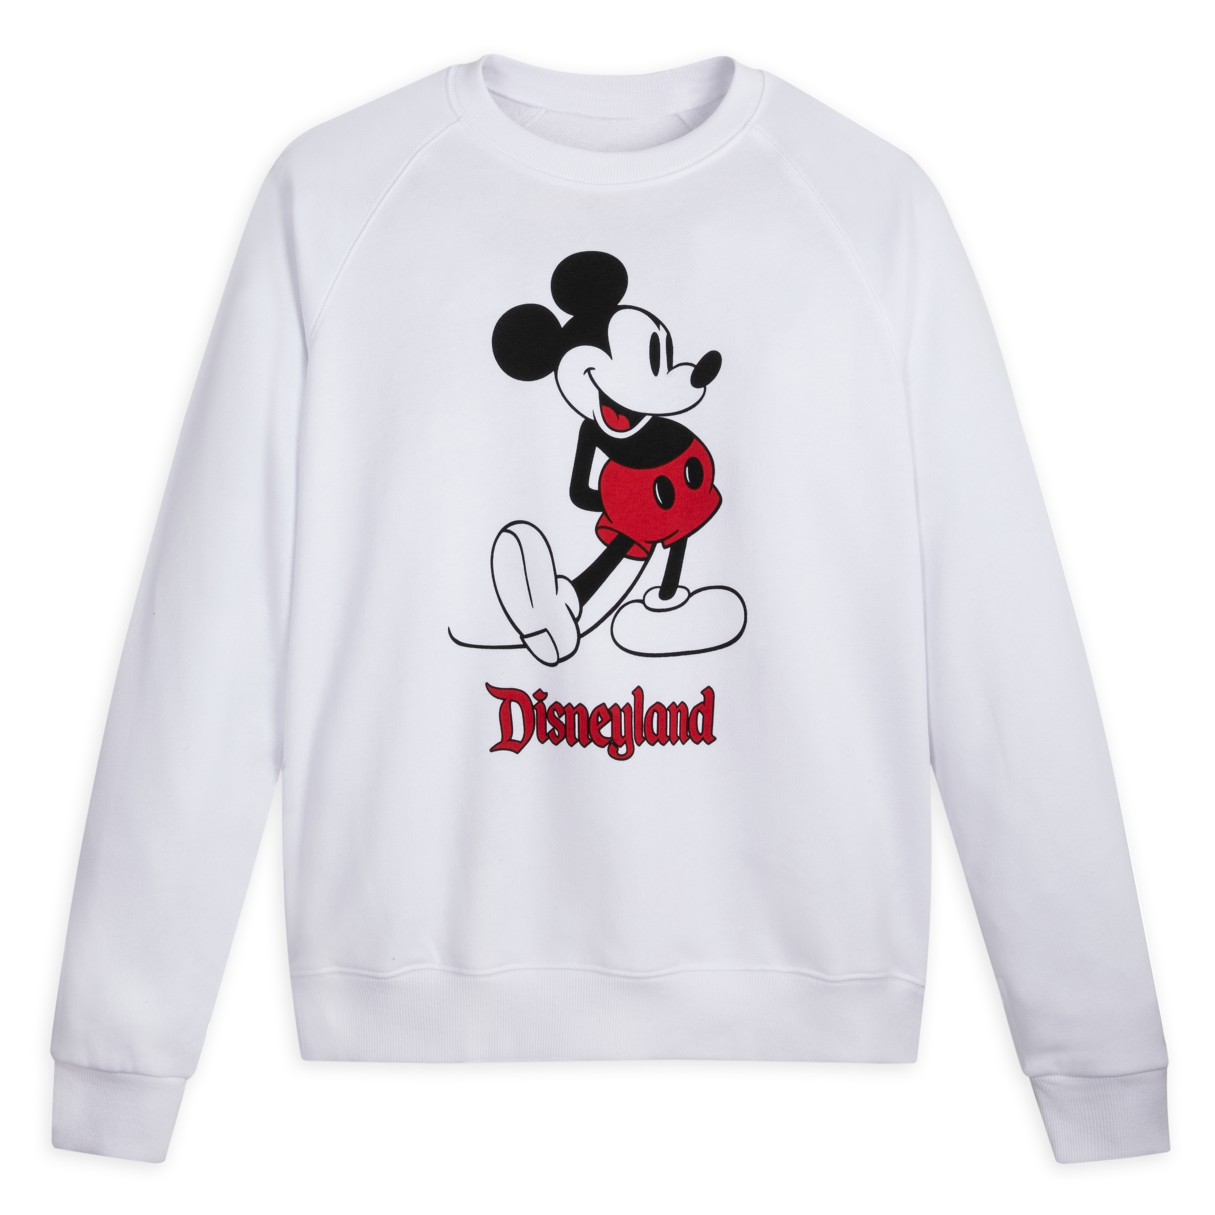 Mickey Mouse Classic Sweatshirt for Adults – Disneyland – White